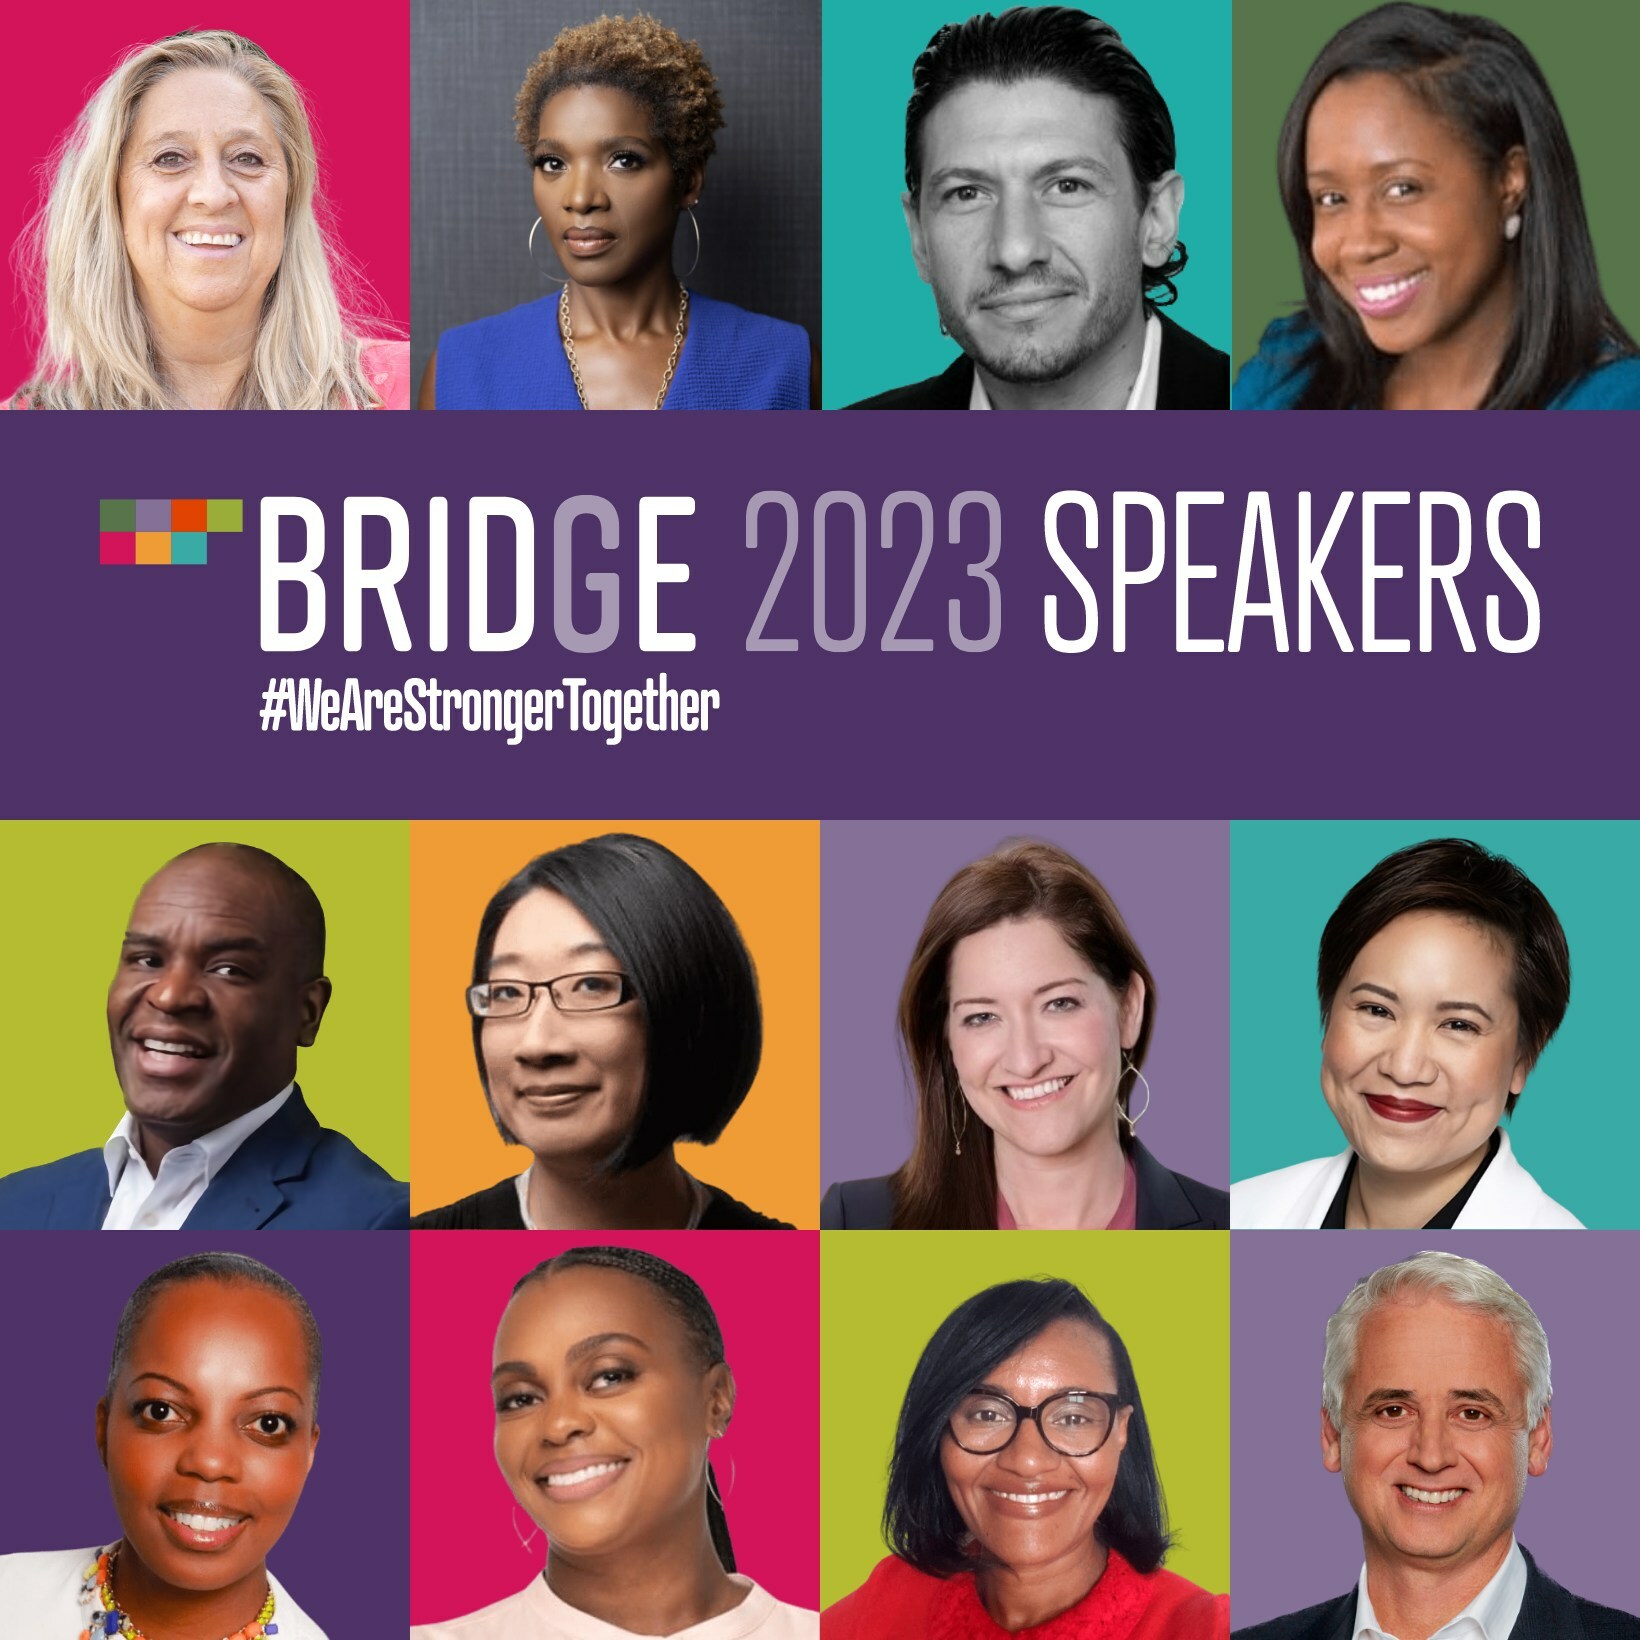 BRIDGE Announces an Unprecedented Roster of Speakers and the Agenda for its Inaugural Summit and DE&I Retreat